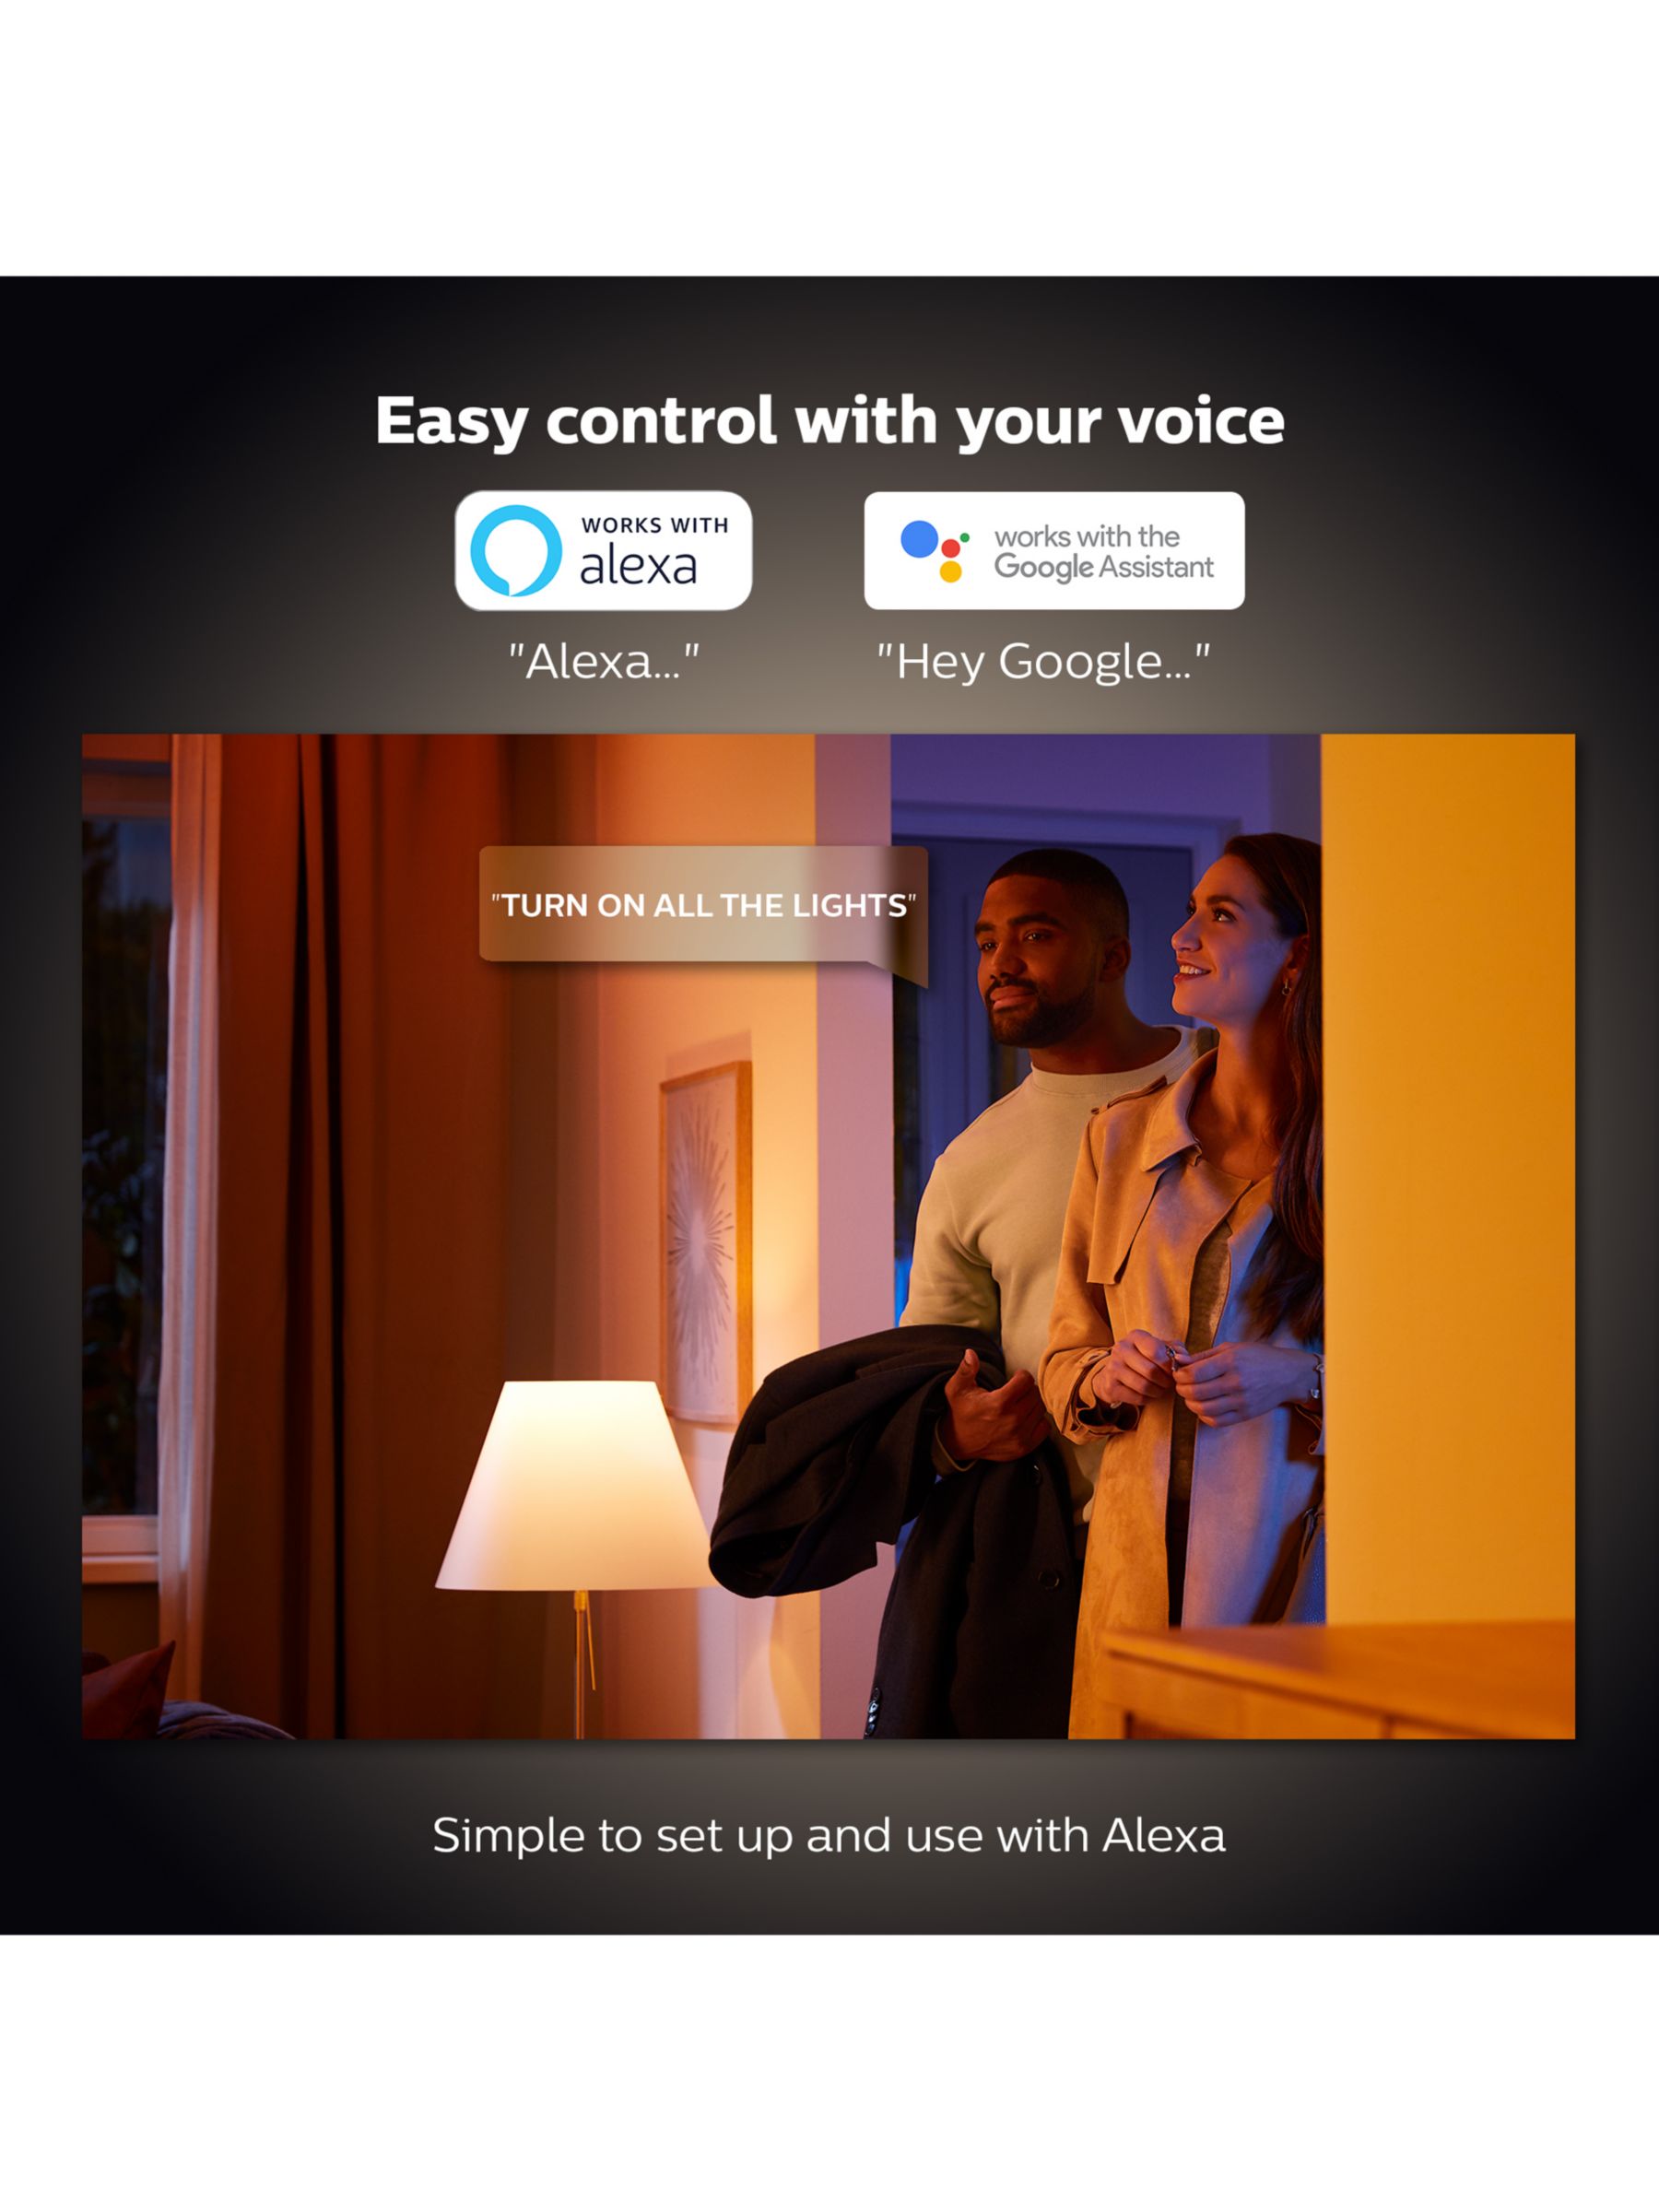 Philips Hue White and Colour Ambiance Wireless Lighting LED Colour Changing  Light Bulb with Bluetooth, 9W A60 E27 Edison Screw Bulb, Single